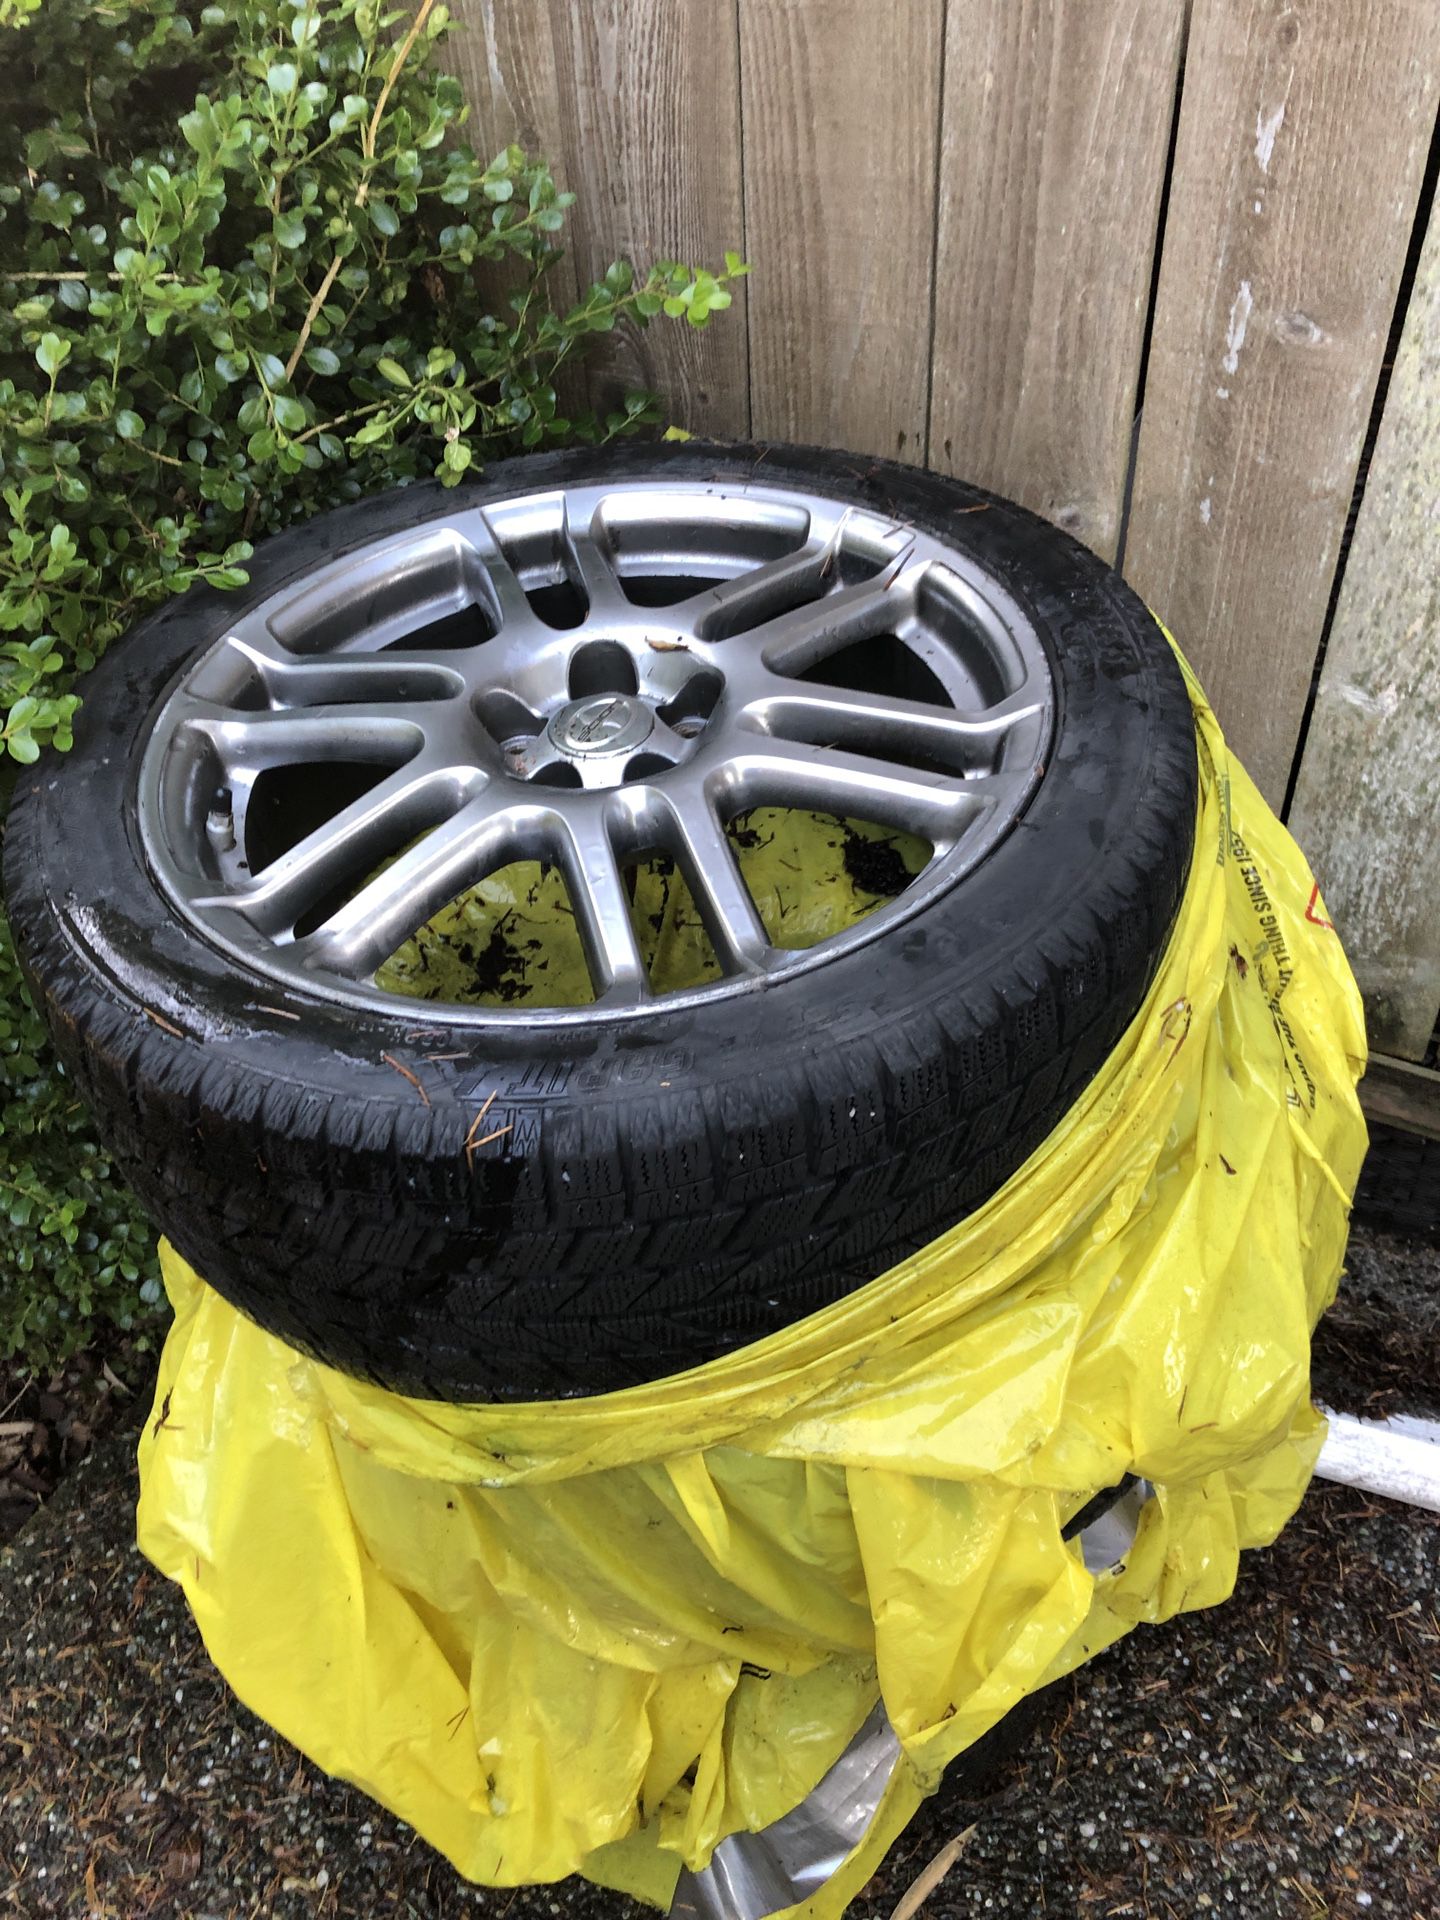 215/45R17 Studless Snow Tires And Alloy Wheels, Scion, Toyota, Etc